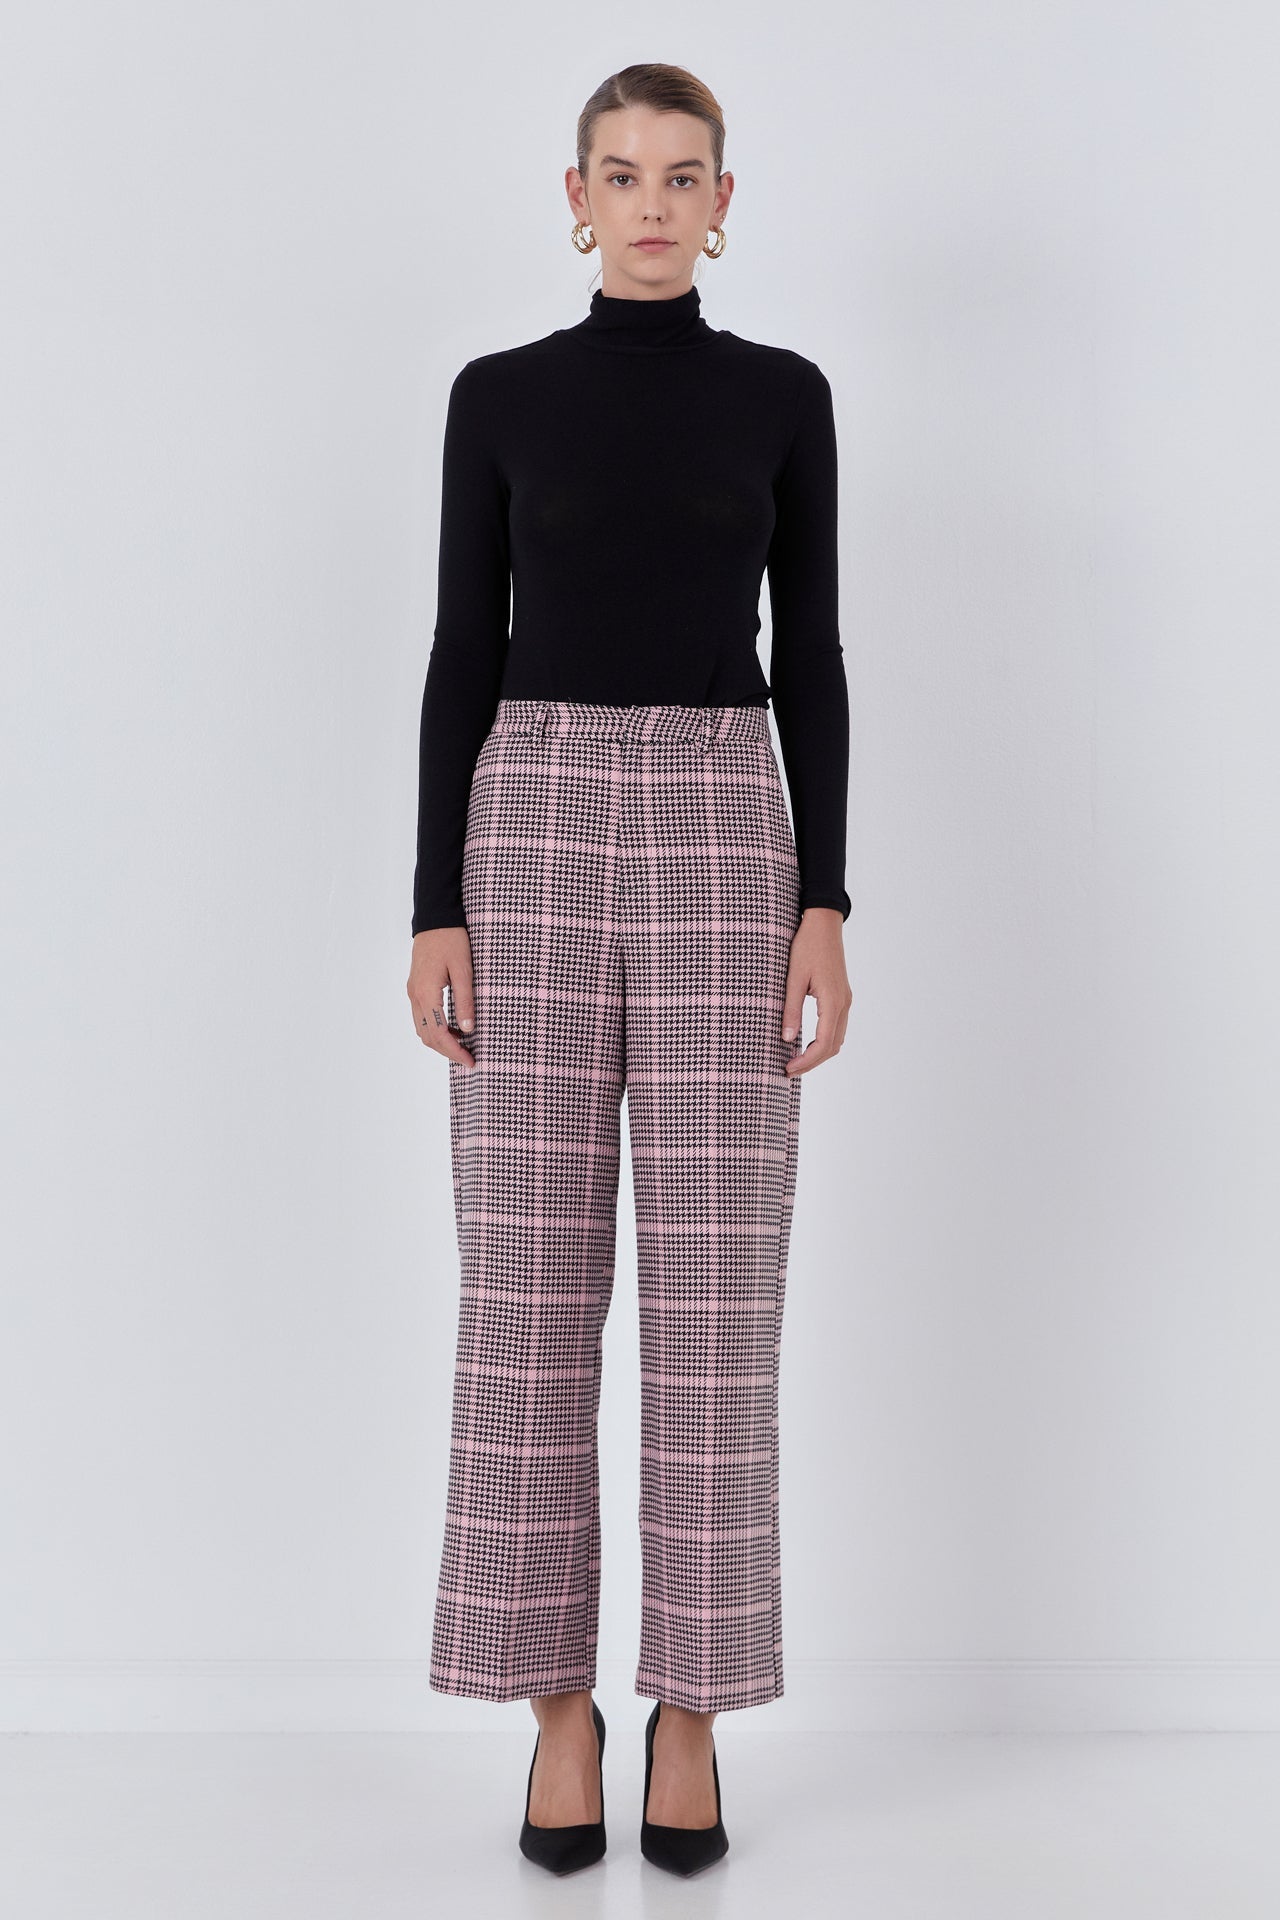 Endless Rose - Houndstooth Women Pants - Pants in Women's Clothing available at endlessrose.com